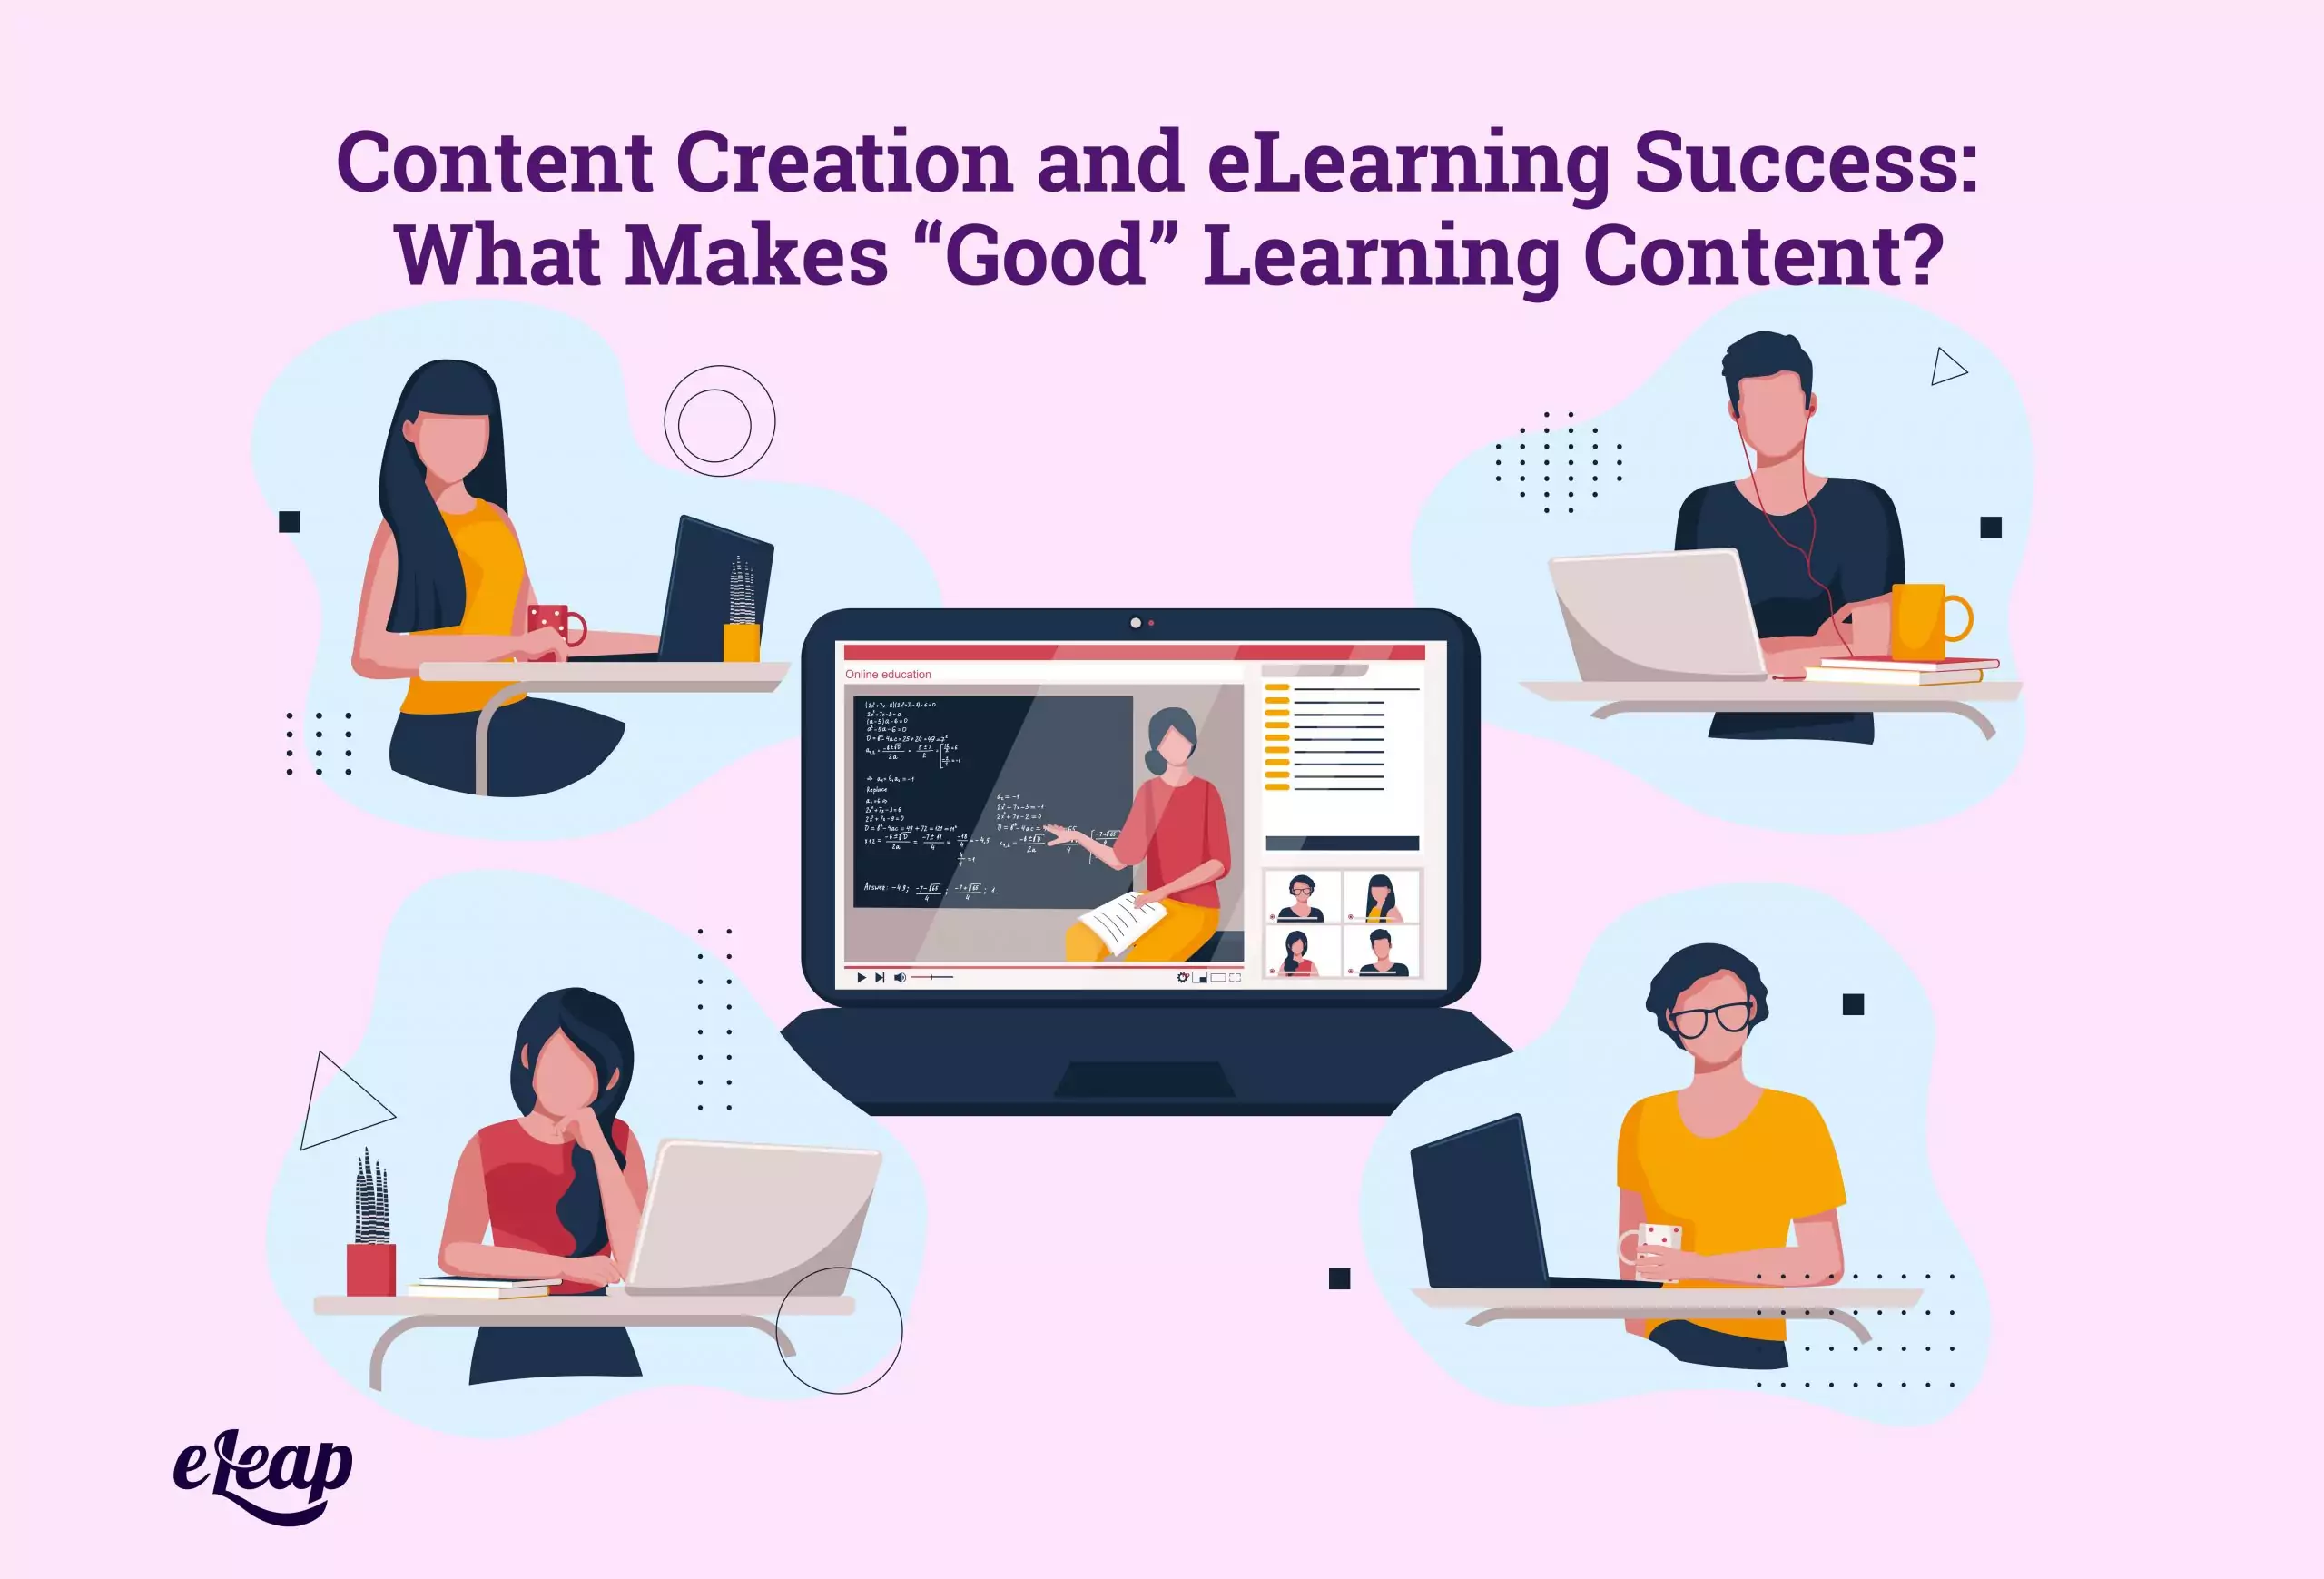 Content Creation and eLearning Success: What Makes “Good” Learning Content?